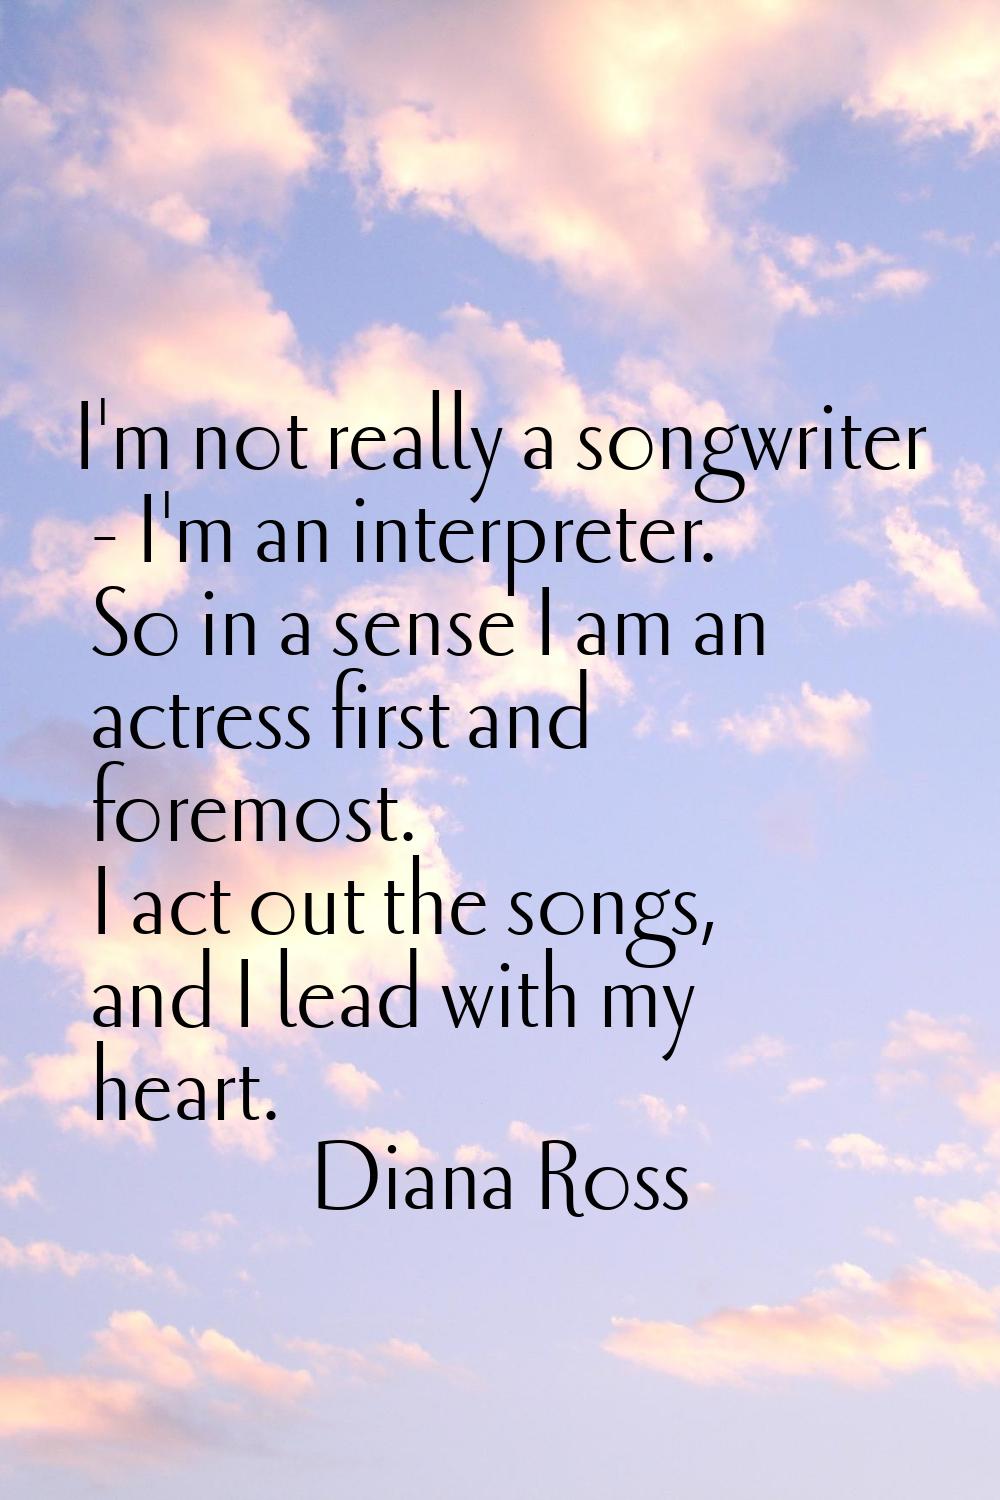 I'm not really a songwriter - I'm an interpreter. So in a sense I am an actress first and foremost.